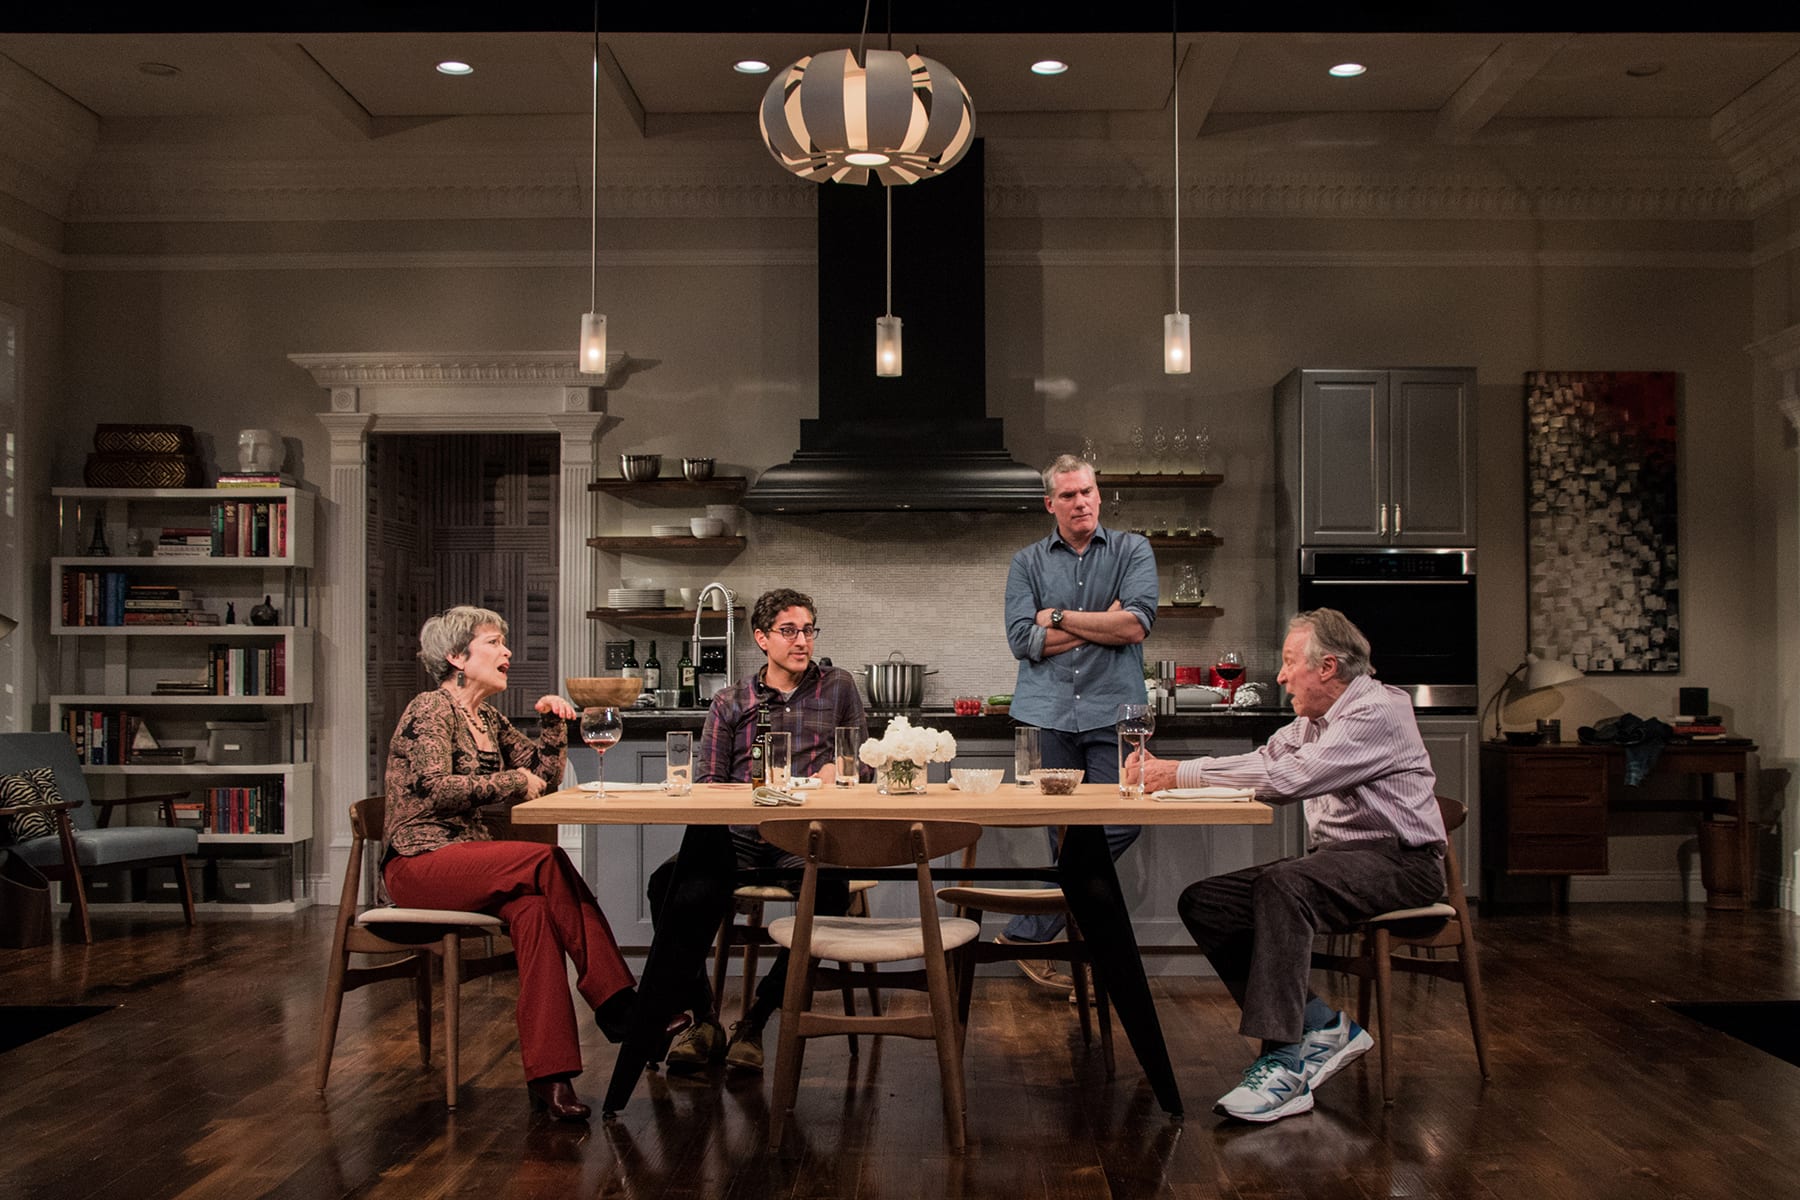 Naomi Jacobson (Trish), Maulik Pancholy (Kevin), Glenn Fitzgerald (Theo), and Greg Mullavey (Len) in The Remains. Photo by Teresa Wood. 